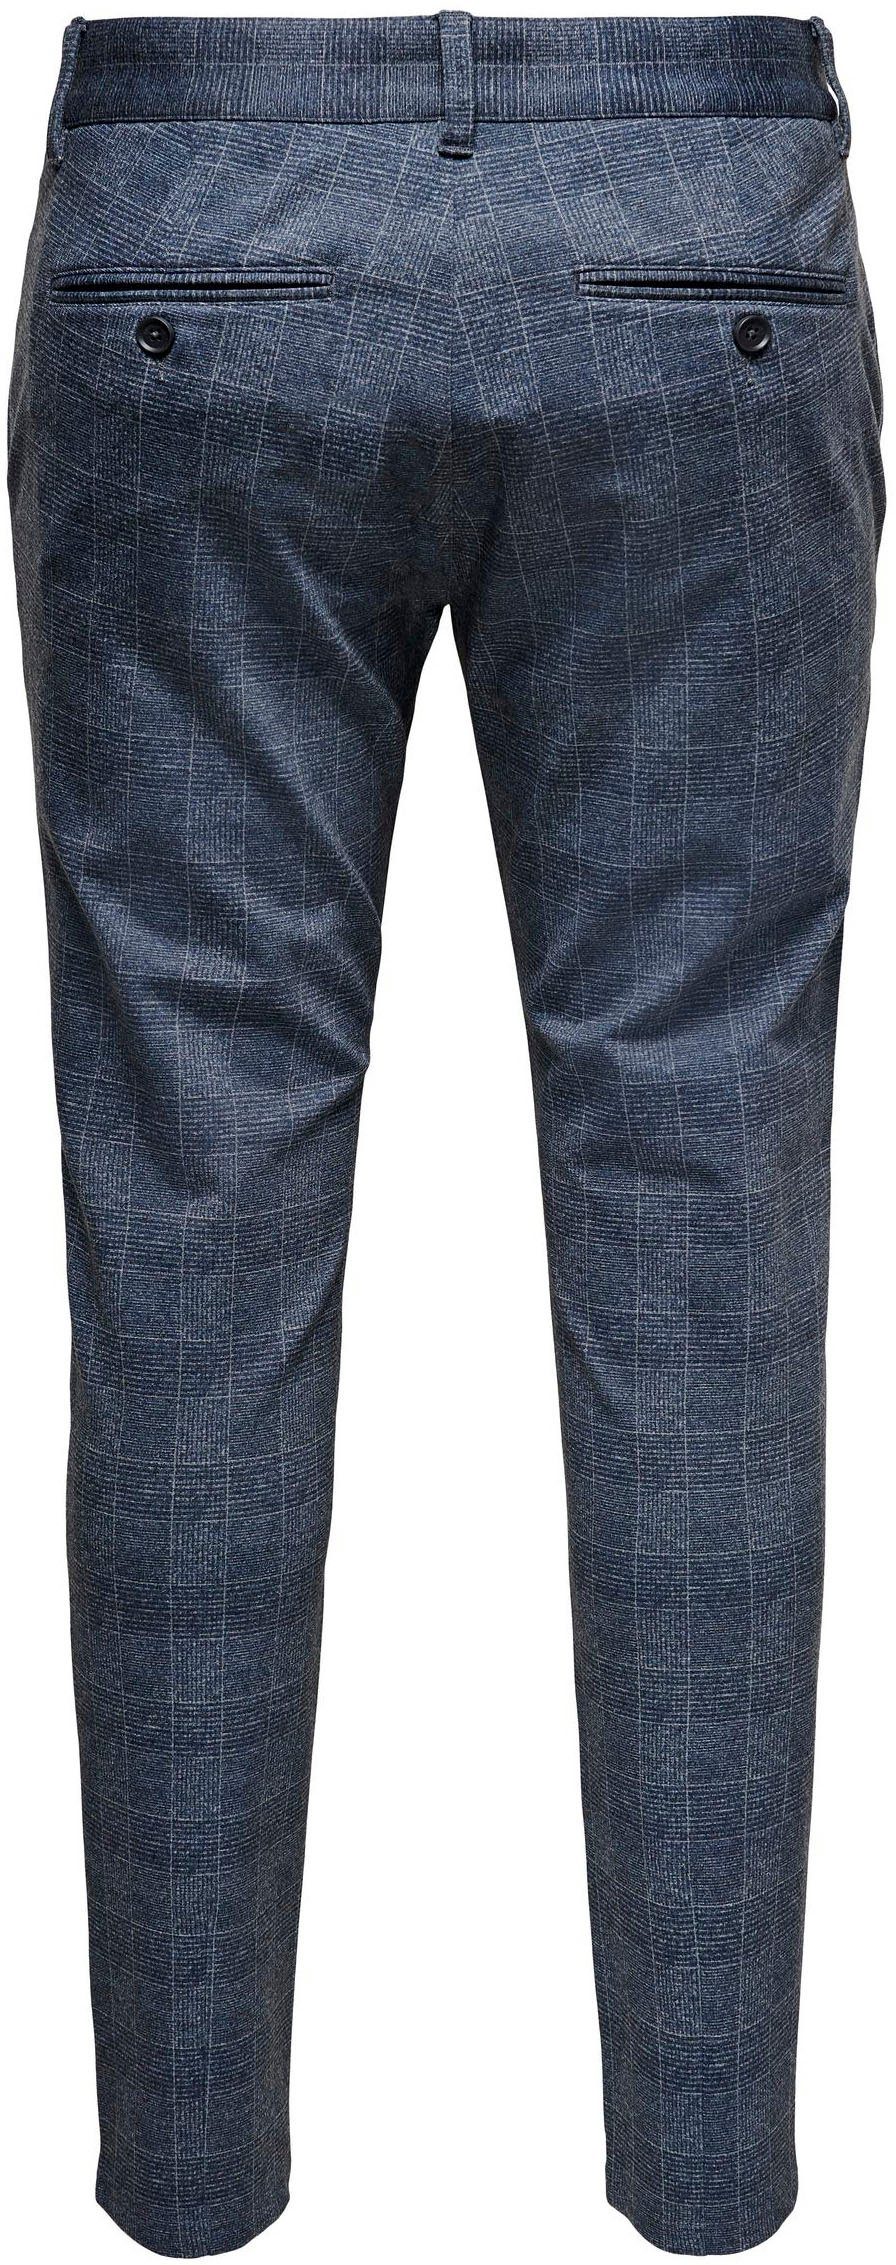 blau ONLY Chinohose CHECK MARK PANTS kariert & SONS